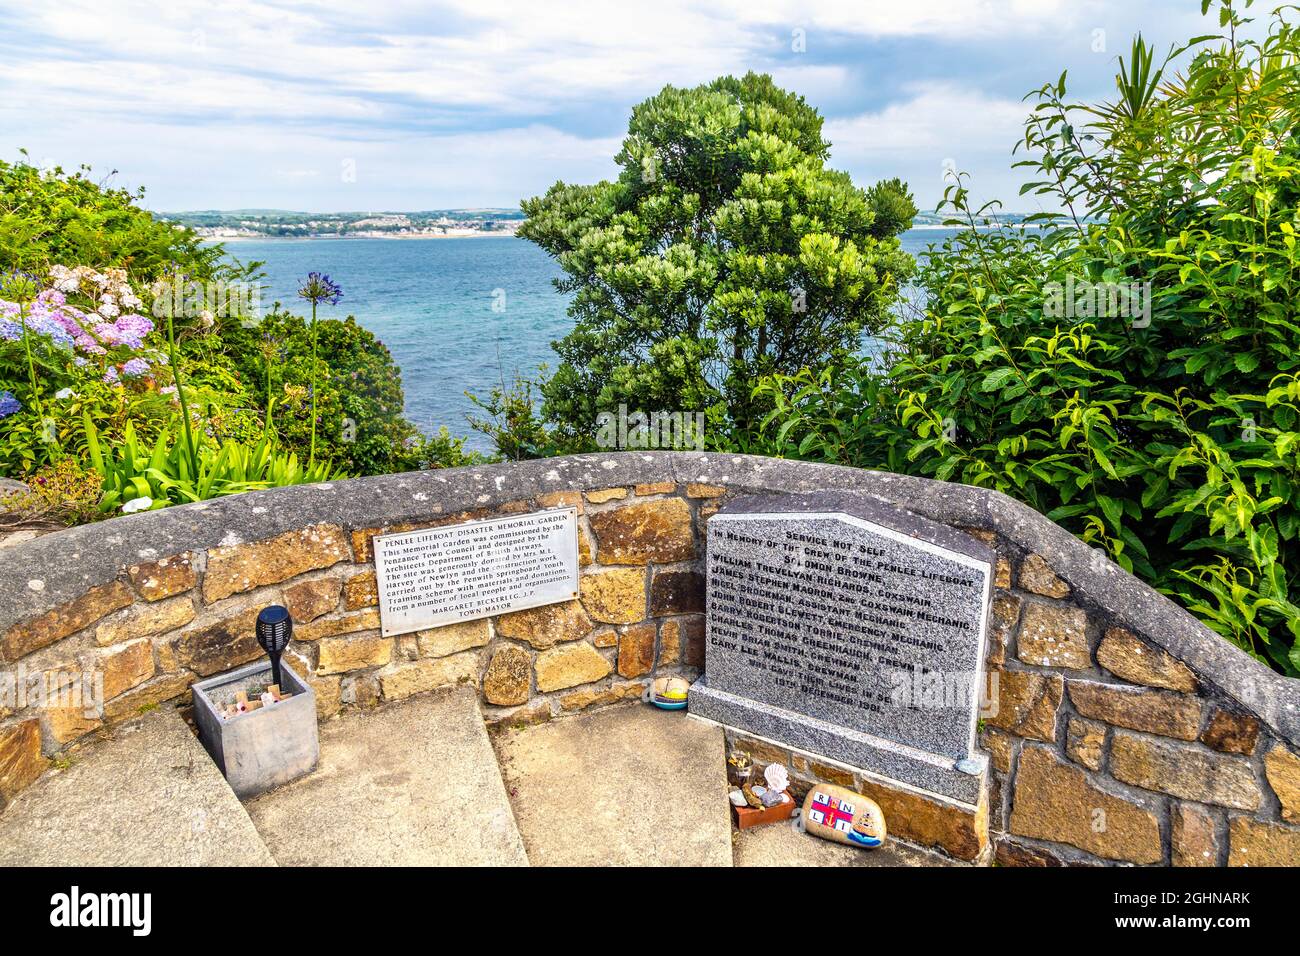 Penlee Lifeboat Disaster Memorial Garden entre Newlyn et Mousehole, Penwith, Cornwall, Royaume-Uni Banque D'Images